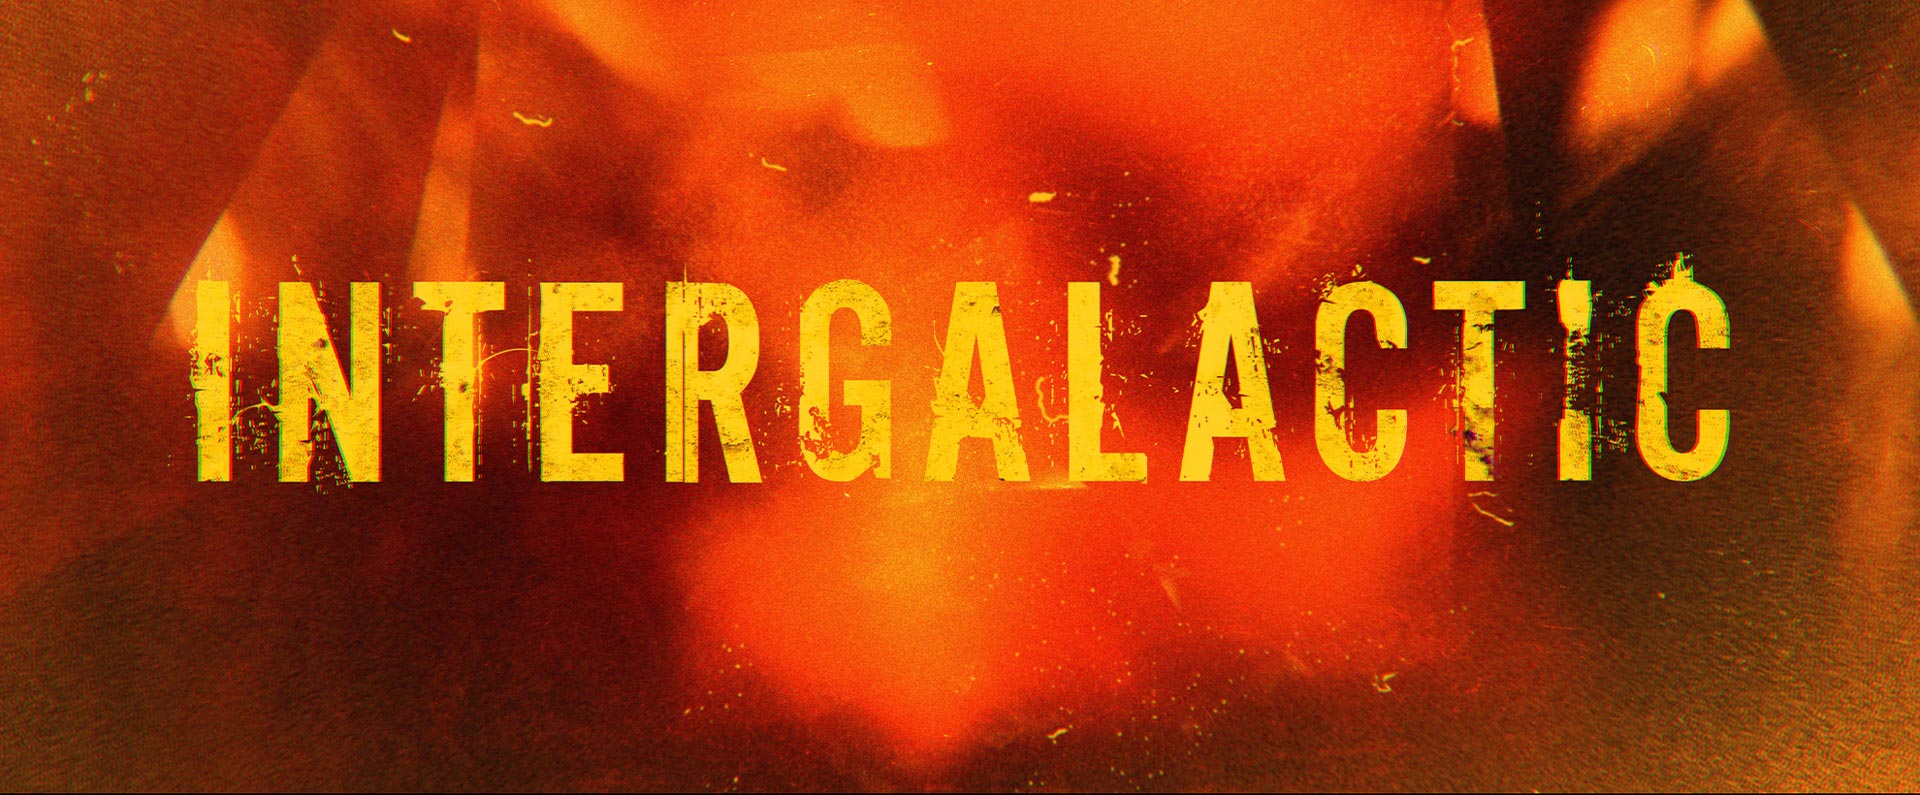 "Intergalactic" in a bold yellow font, on an orange and red background